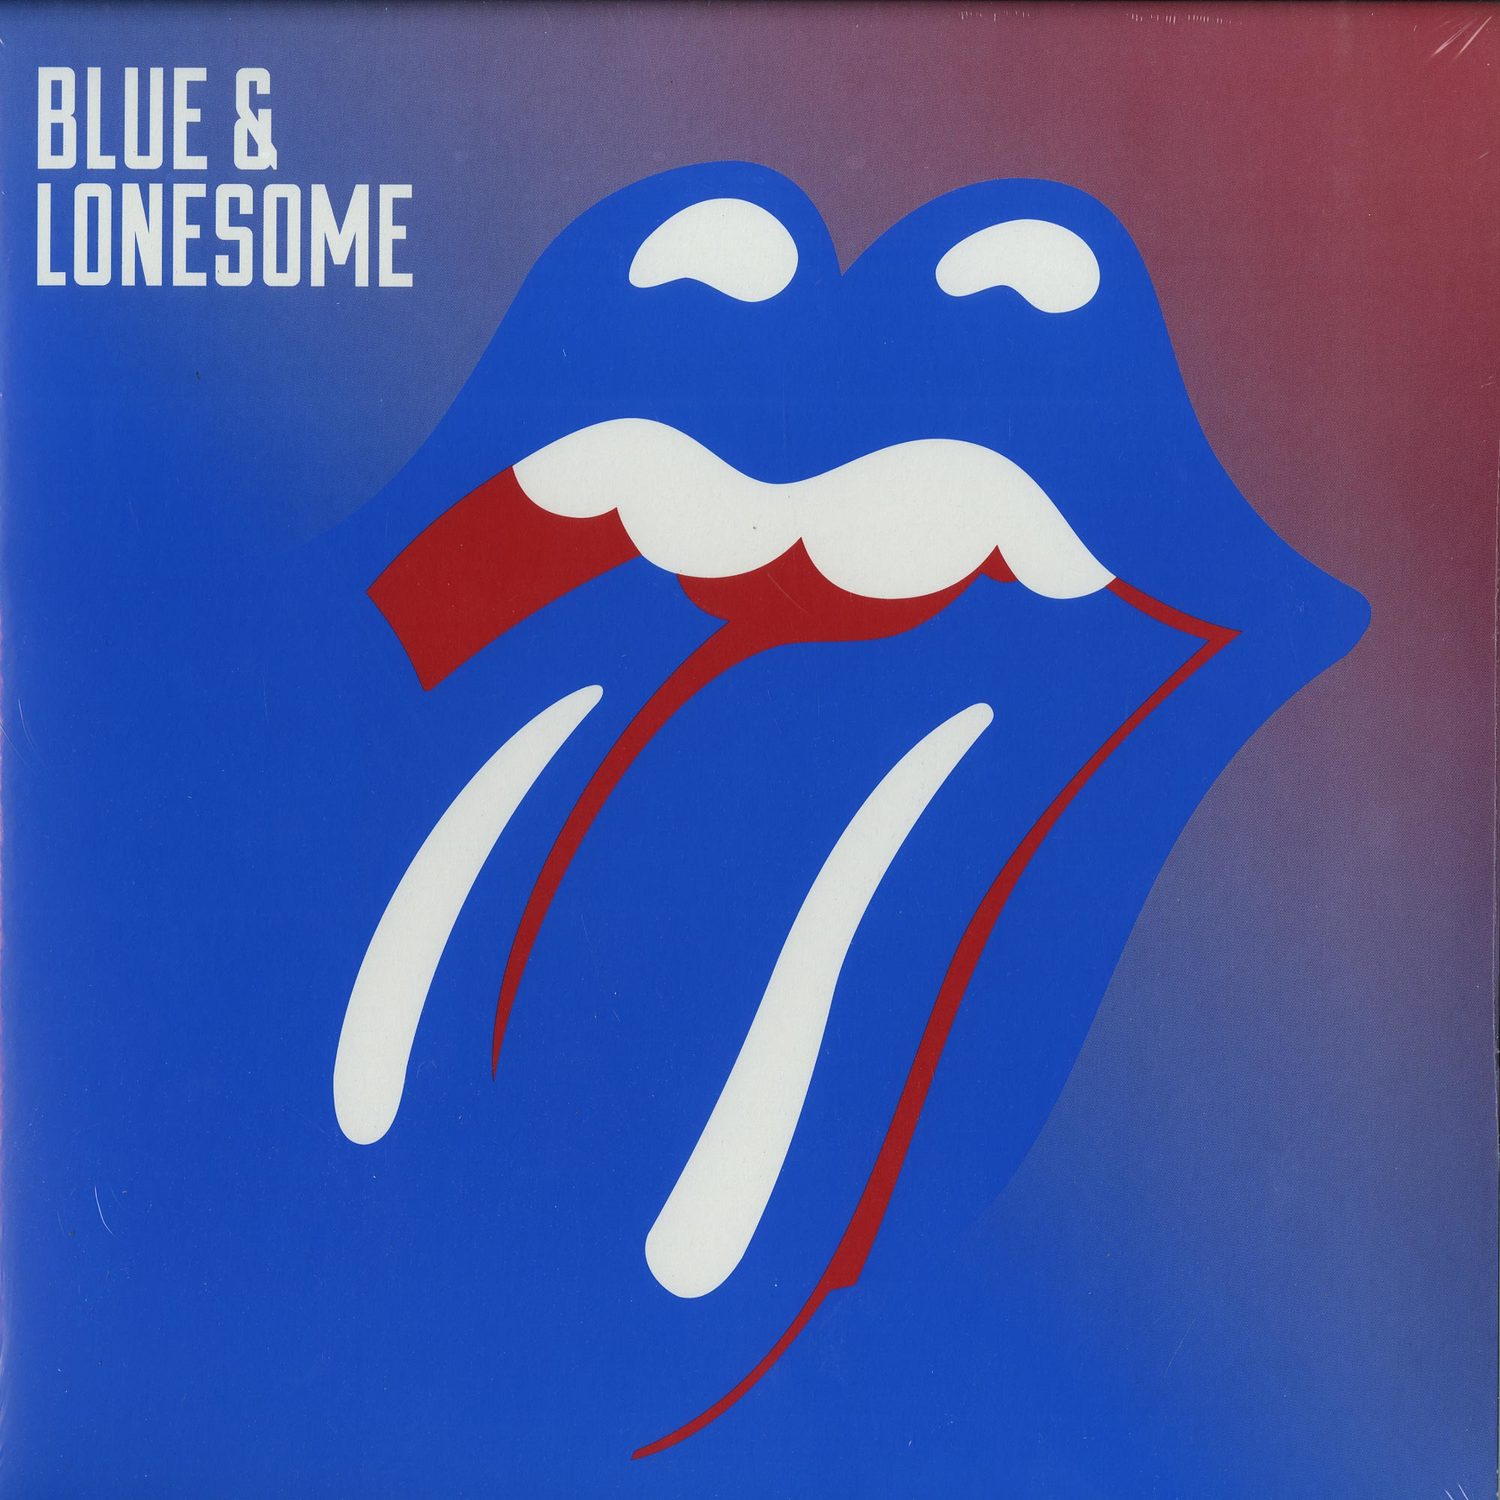 Rolling Stones - BLUE & LONESOME 